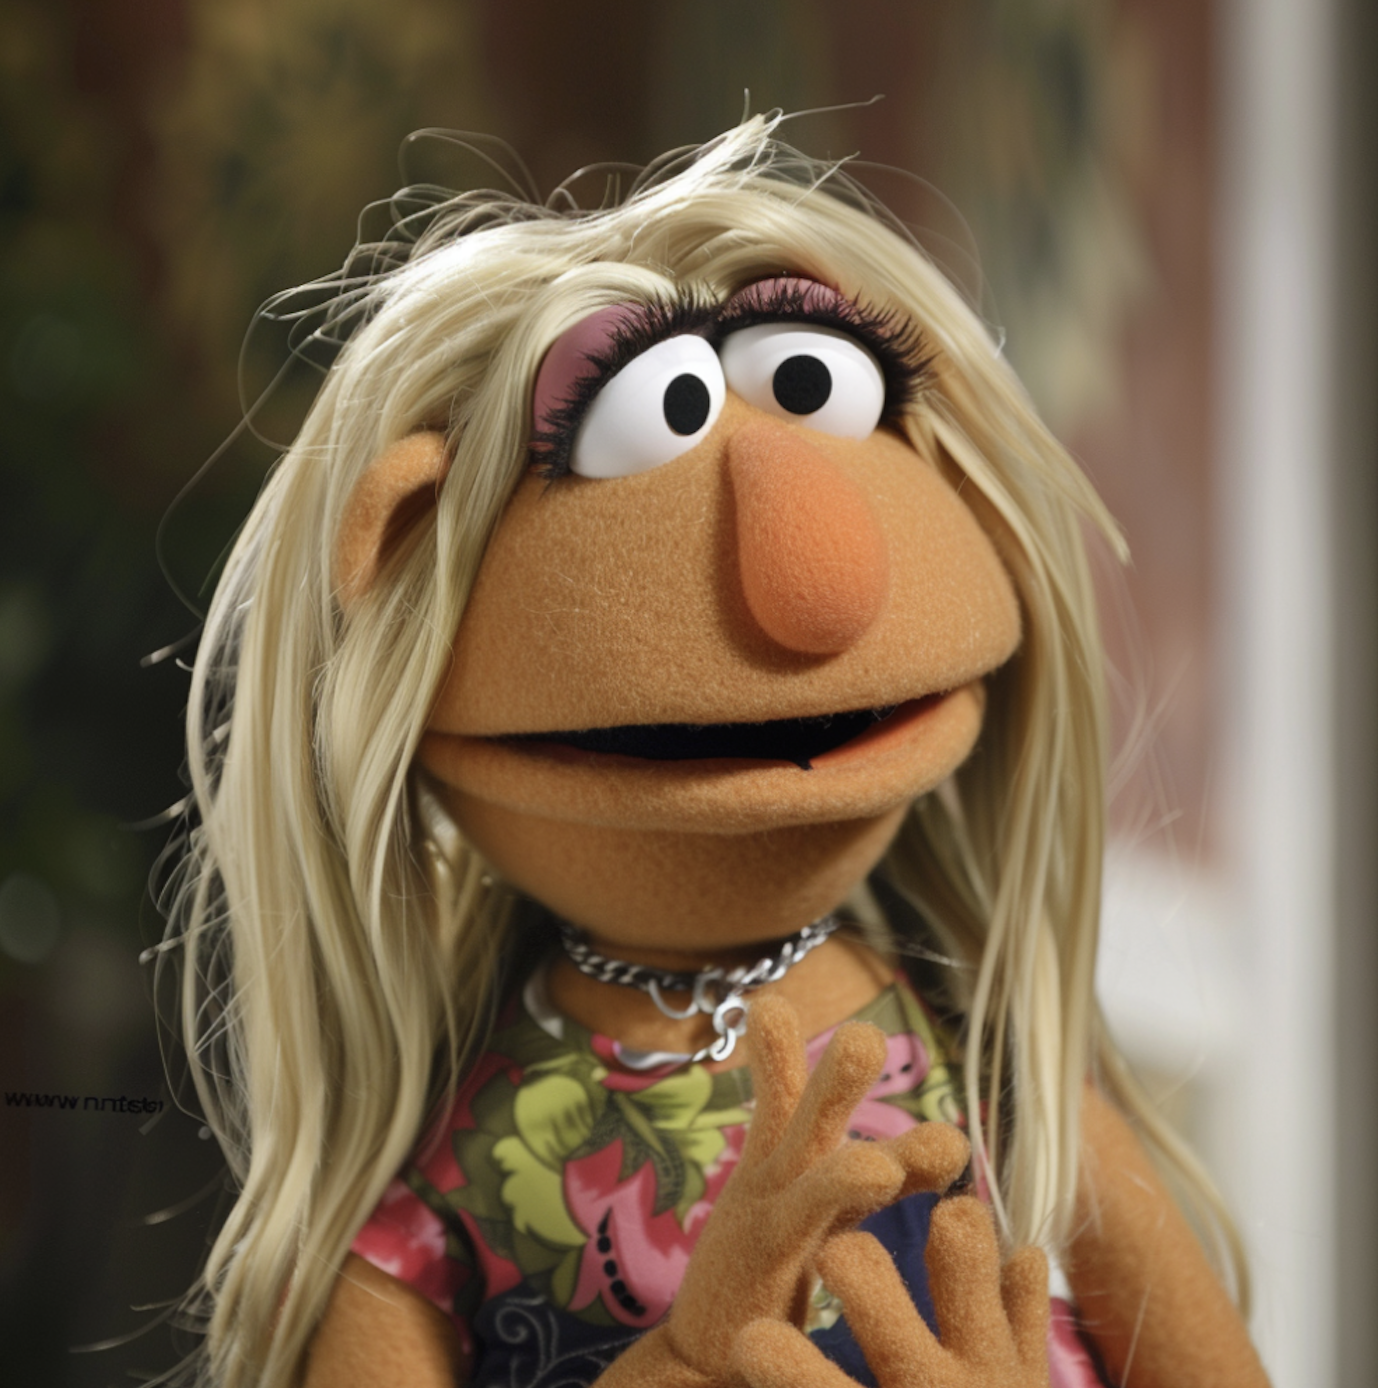 A Muppet with long blonde hair in a floral top and necklace, looking to the side with a thoughtful expression